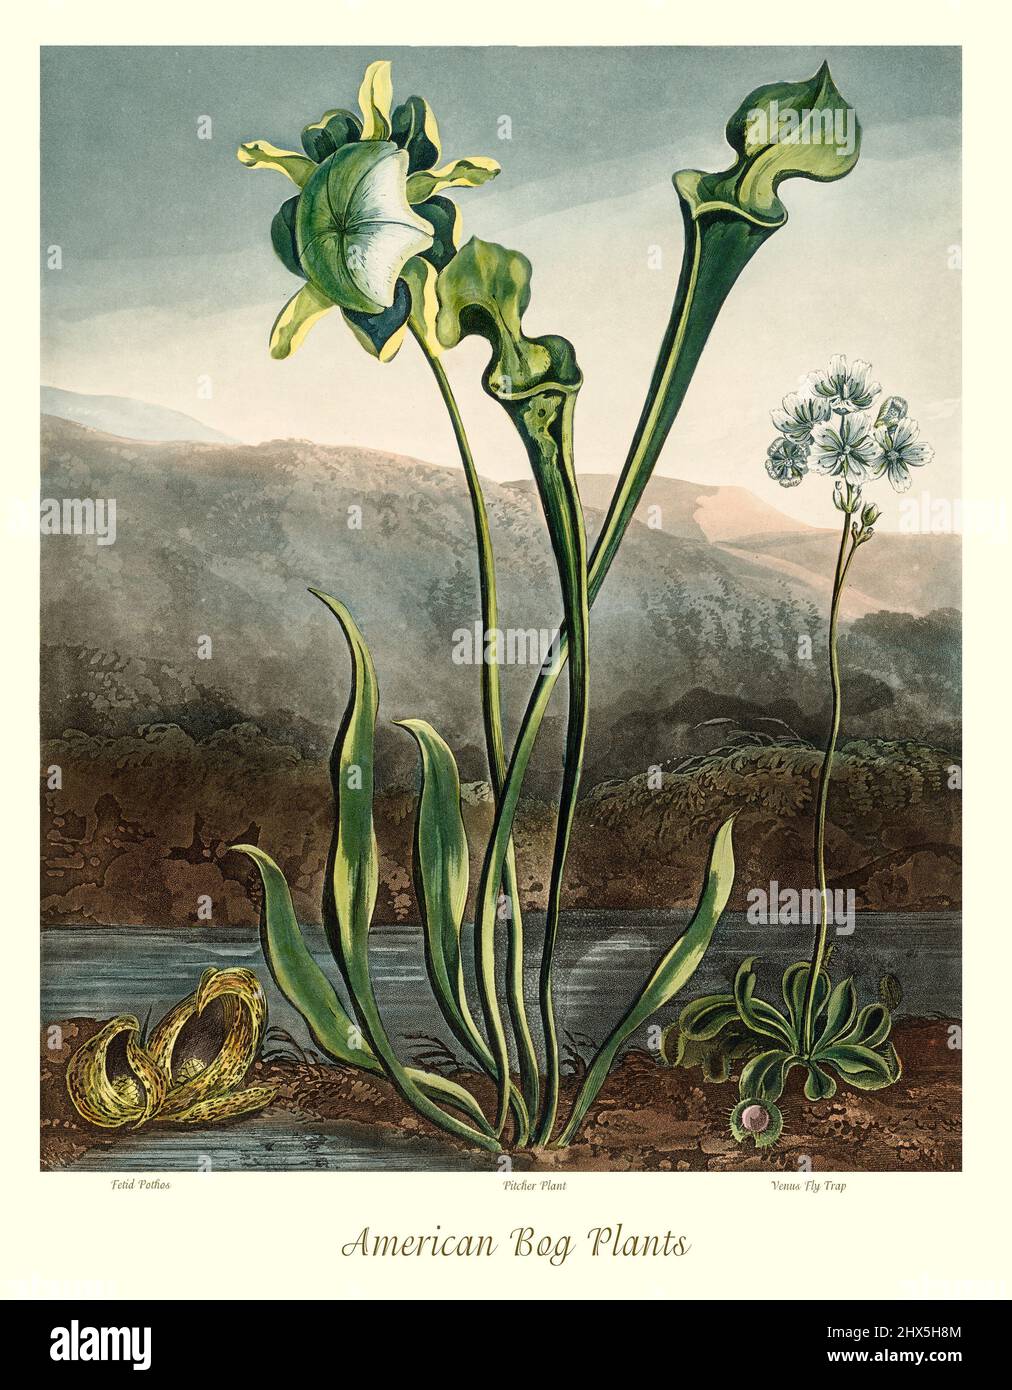 An early 19th century illustration of American Bog Plants, showing a skunk cabbage (Symplocarpus foetidus), a yellow pitcherplant (Sarracenia flava), and a Venus flytrap (Dionaea muscipula) growing on the bank of a pond. The yellow pitcherplant and Venus flytrap are carnivorous plants. This artwork for Robert John Thornton's 'The Temple of Flora' in 1807, was printed, for the publisher, by T. Bensley, London, England. Stock Photo